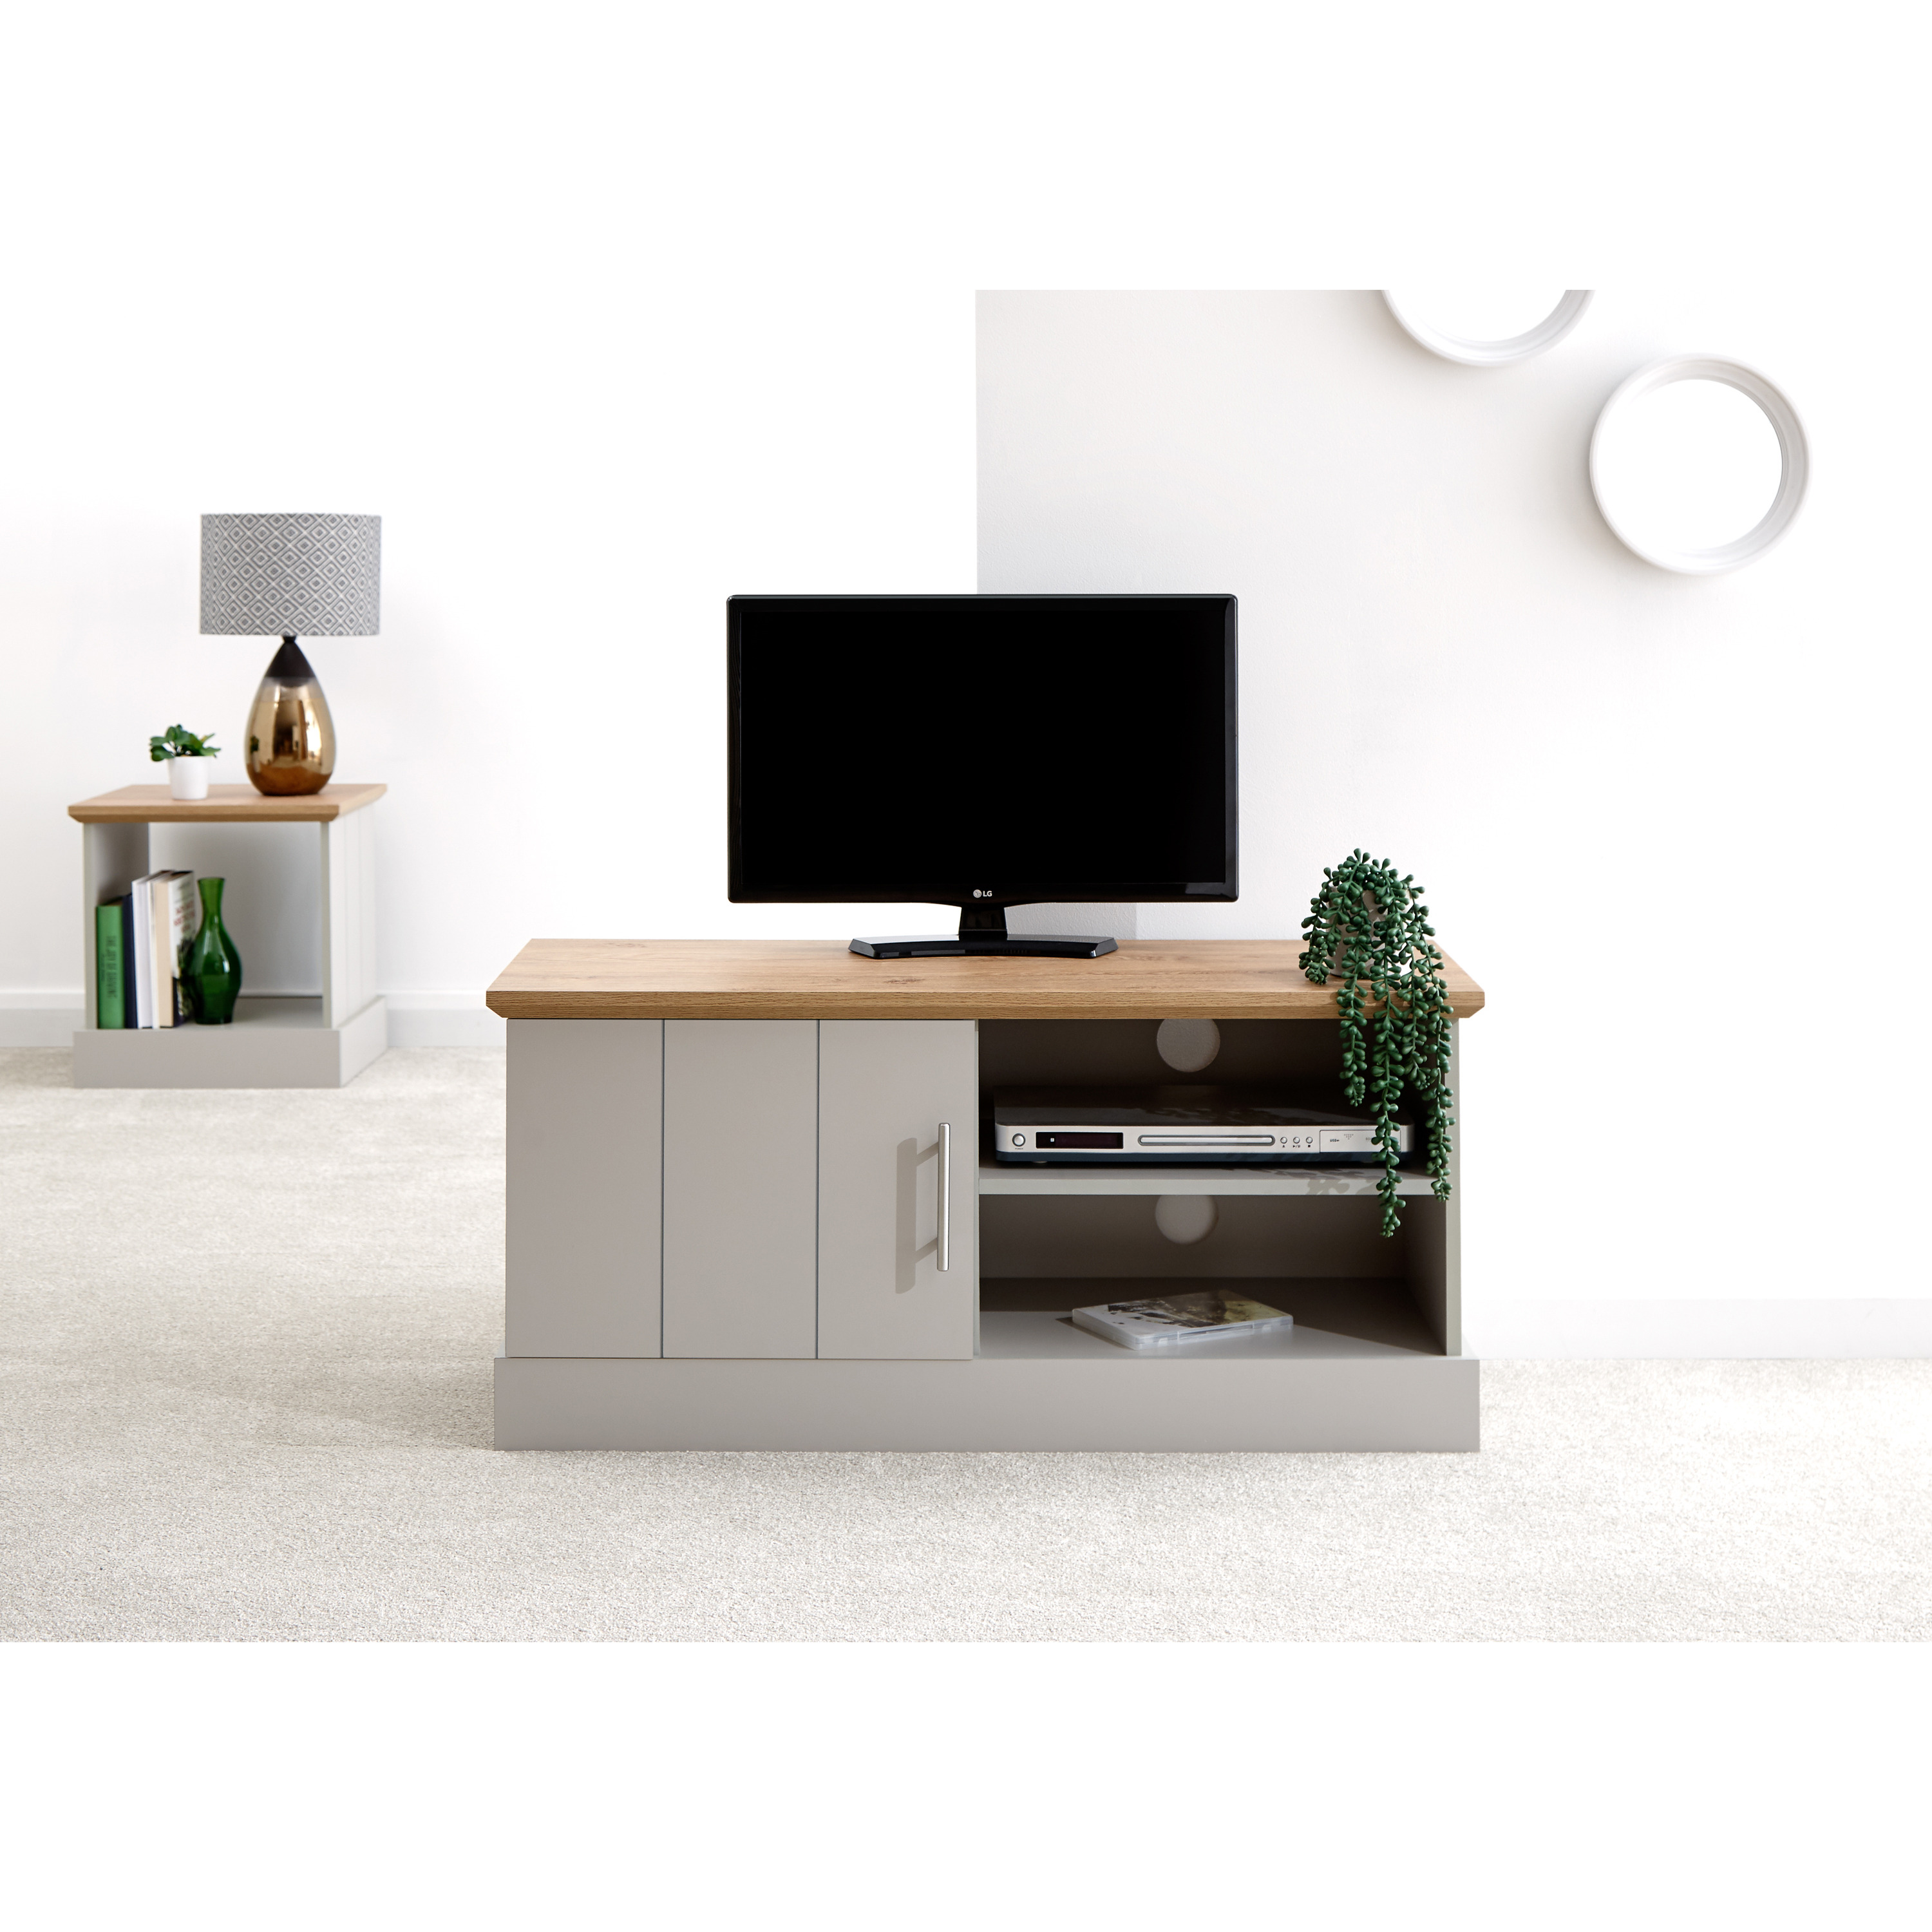 GFW Kendal Small TV Unit Grey - image 1